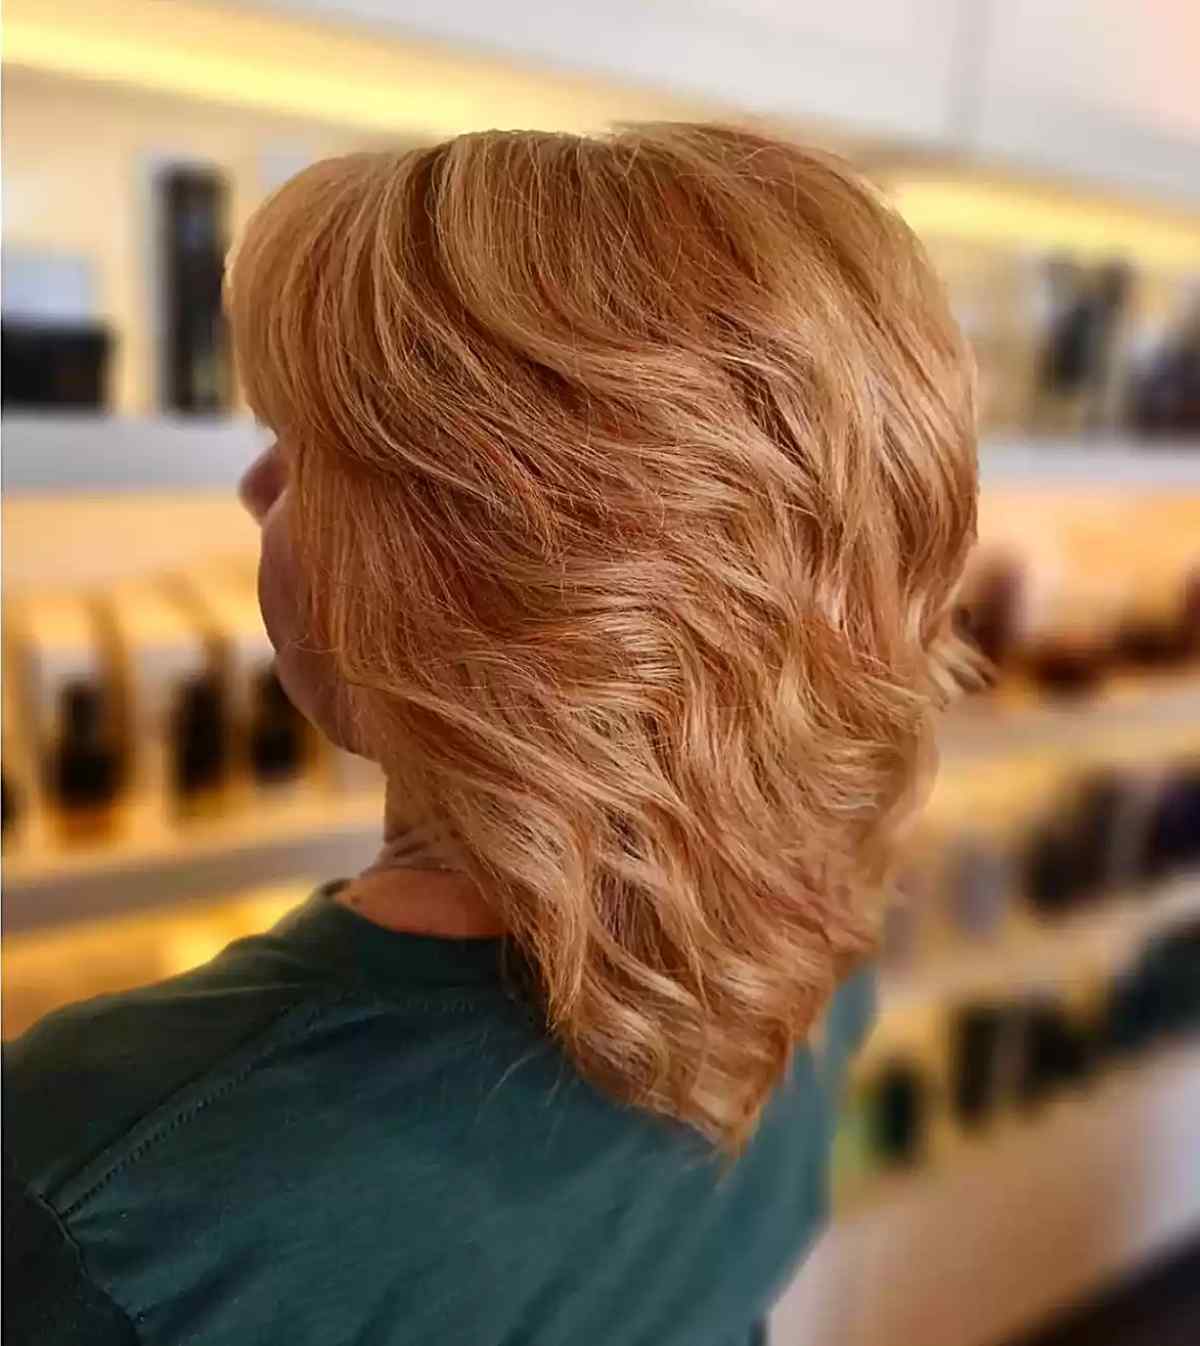 Strawberry Blonde with Medium-Length Layers for Women Ages 60 and Up